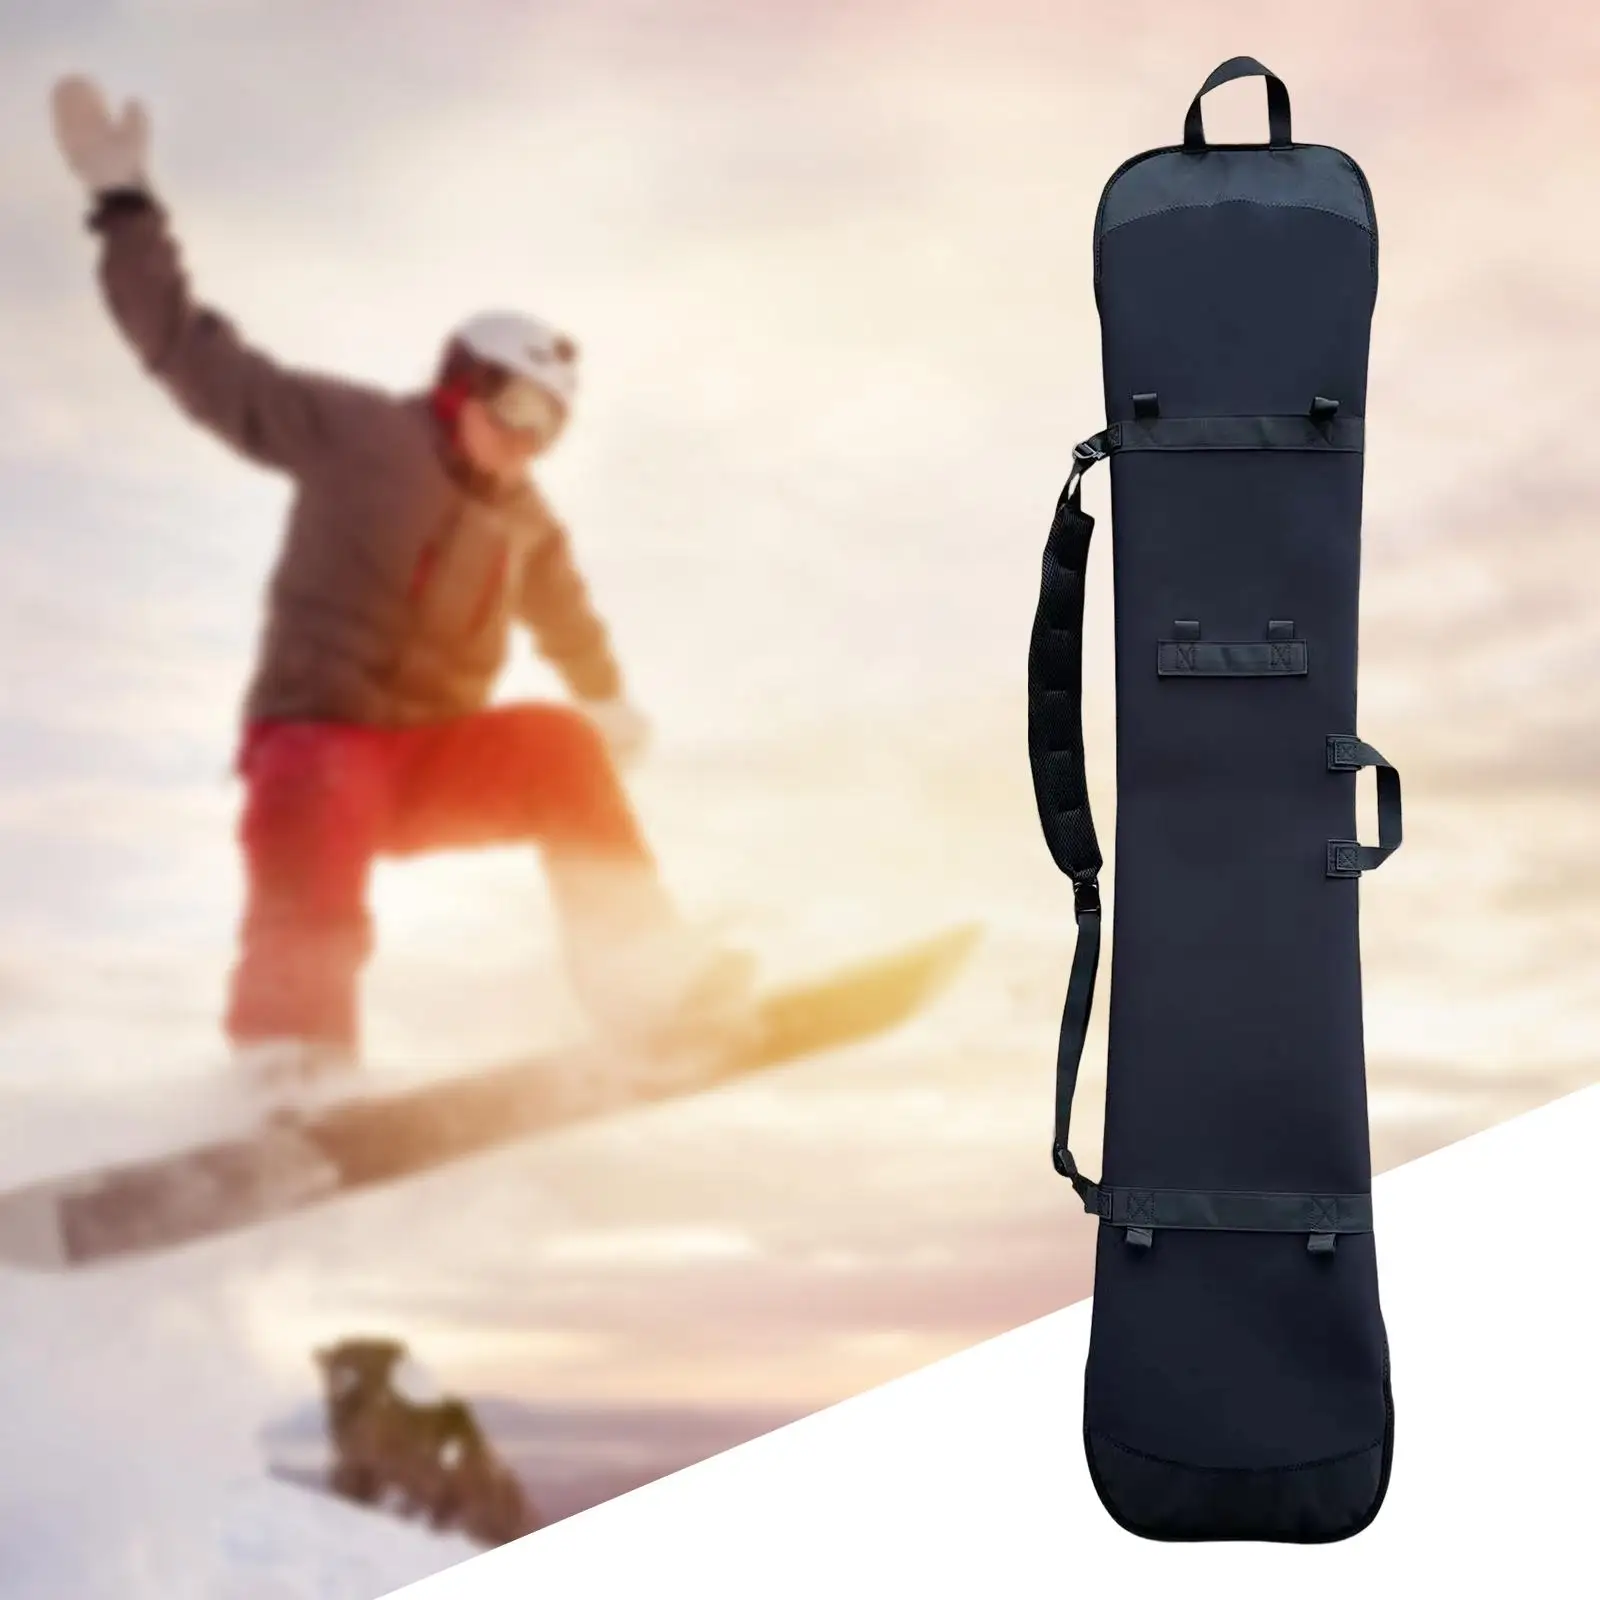 3.5mm Neoprene Protection Sleeve Zipper Luggage Carrying Pack Snowboard Travel Bag for Outdoor Sports Longboard Skiing Trip